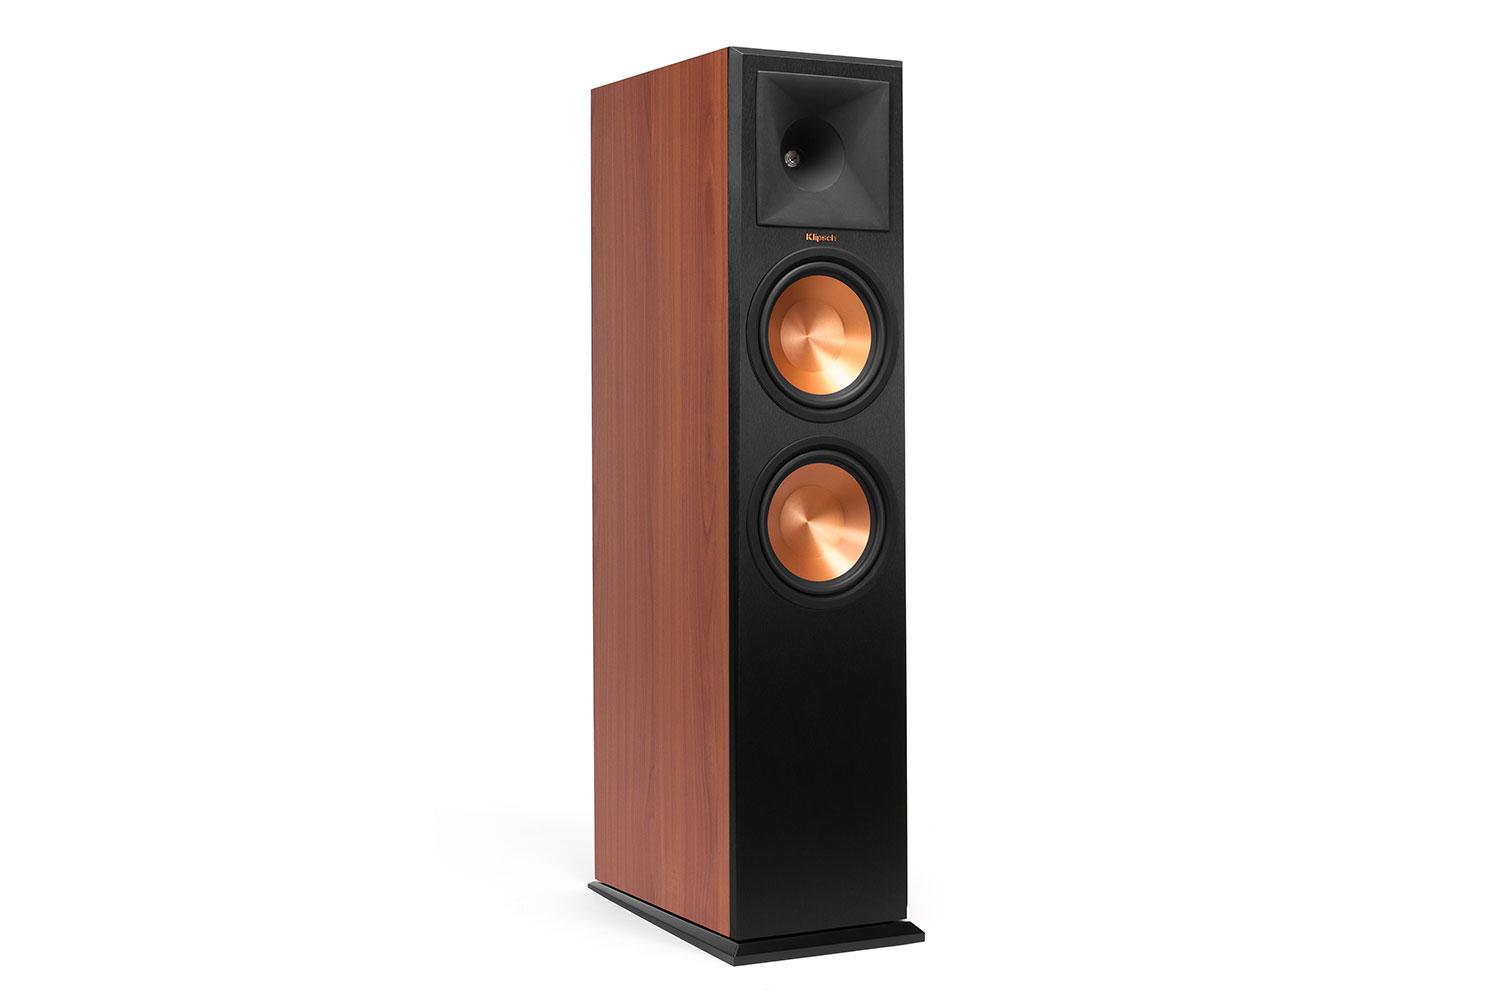 klipsch reference premier speaker system debuts at ces 2015 280f angle cherry